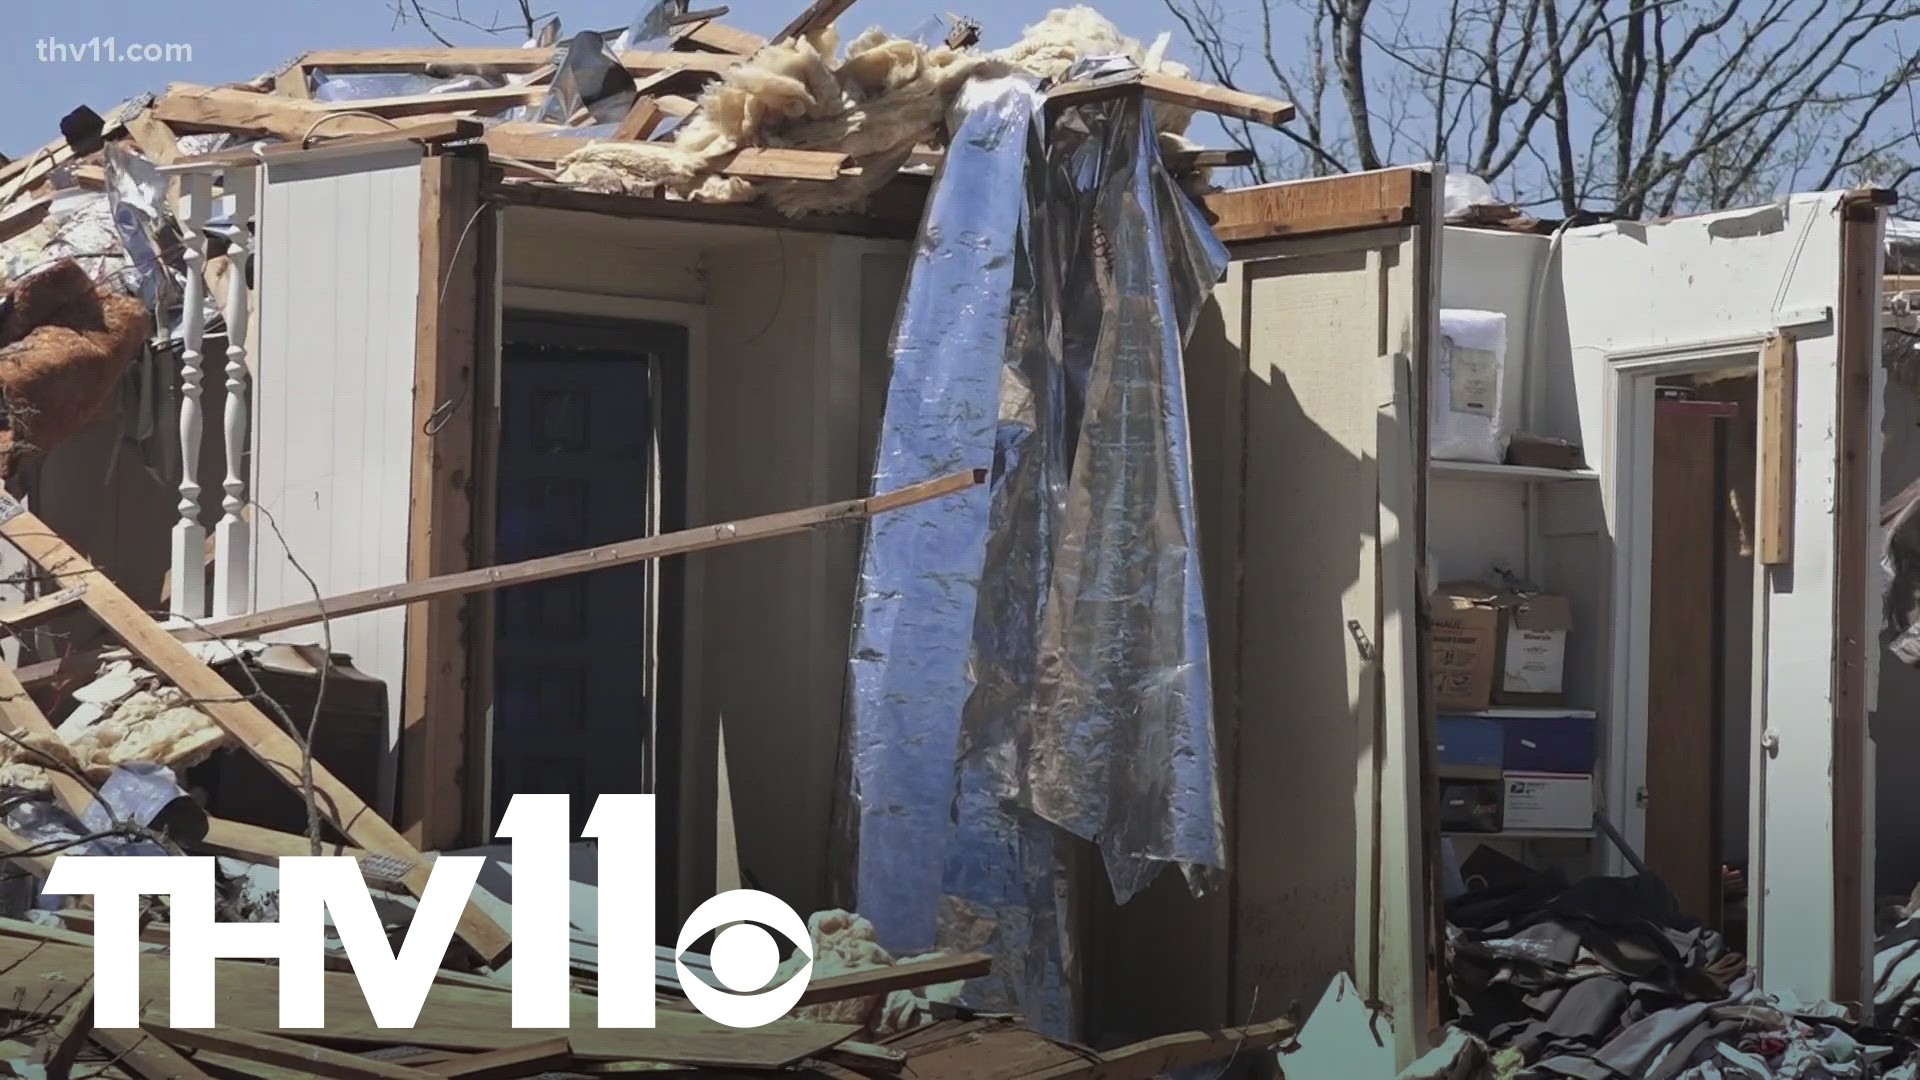 The tornado changed the lives of many Arkansans and as time passes, immediate help goes away, which has some still looking for long-term support.